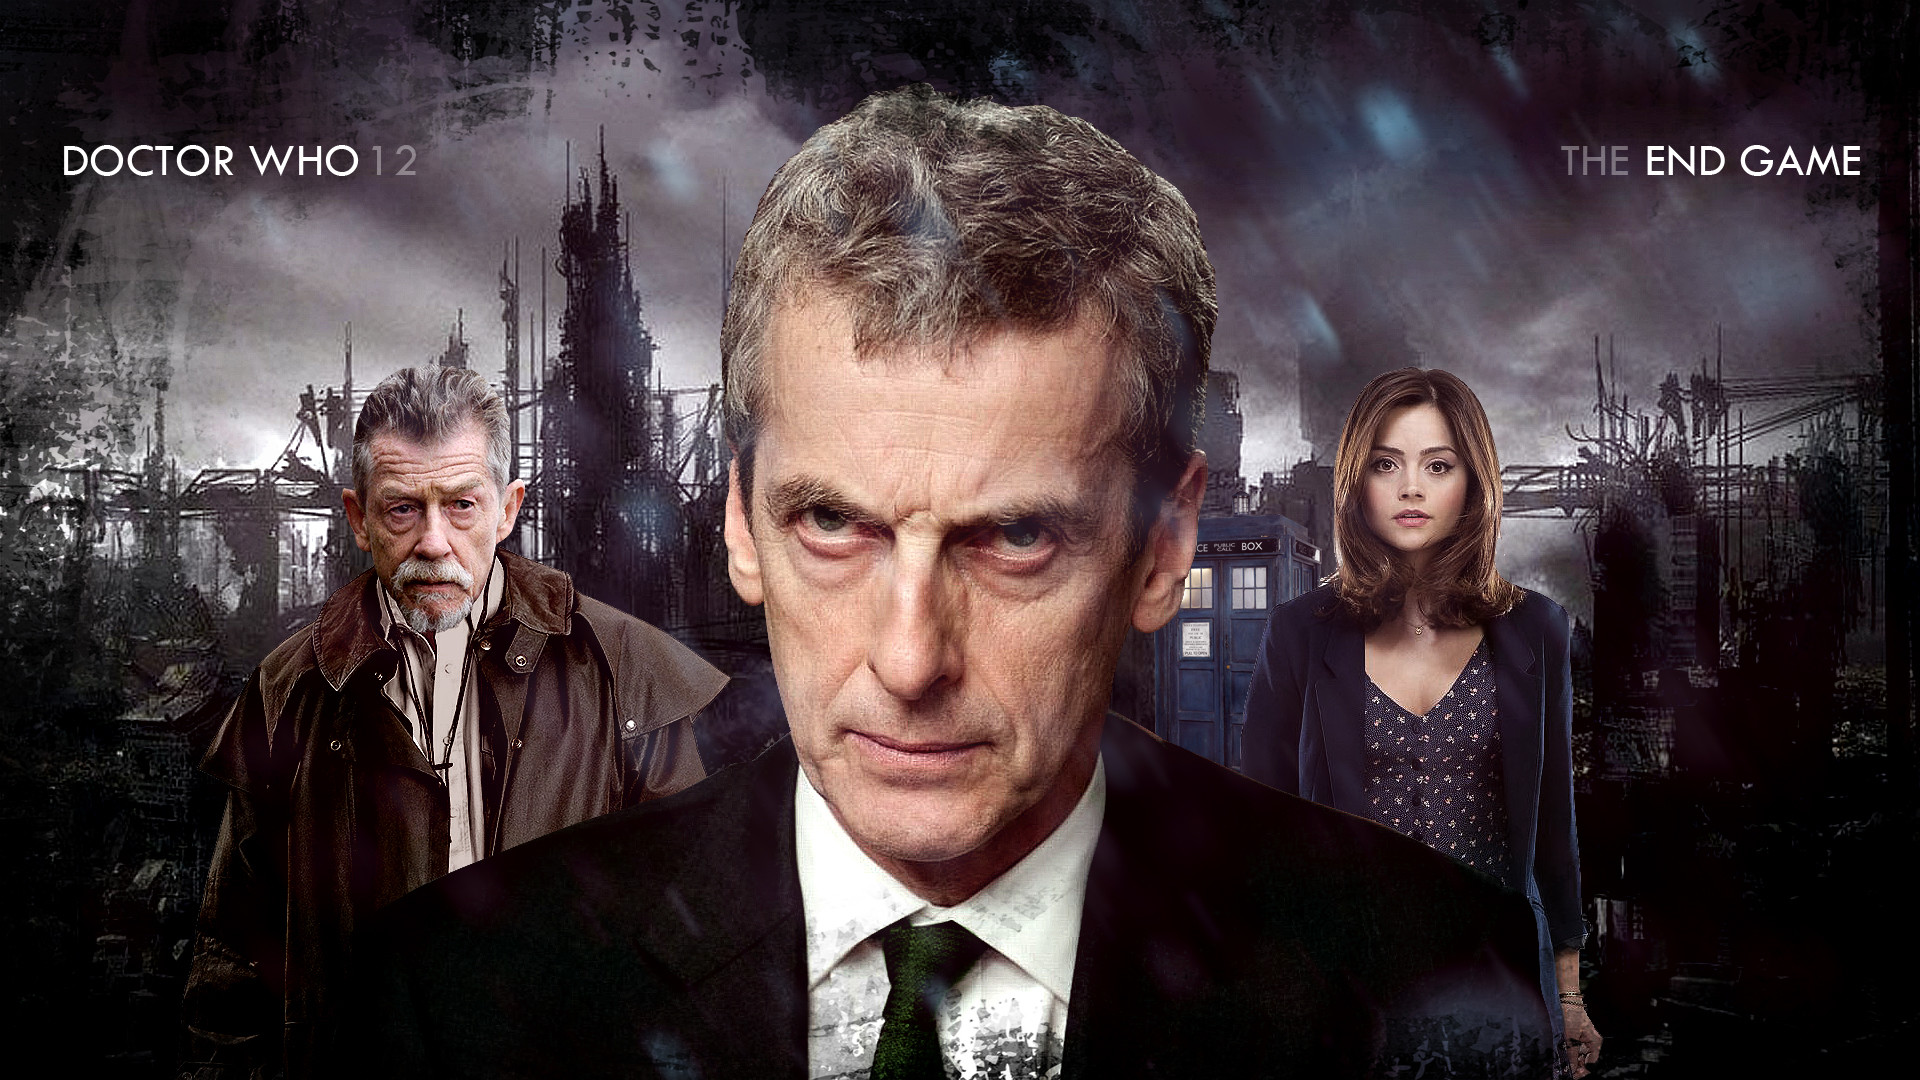 all 12 doctors wallpaper – photo #19. More Doctor Who fanart! The itch is  getting worse though.